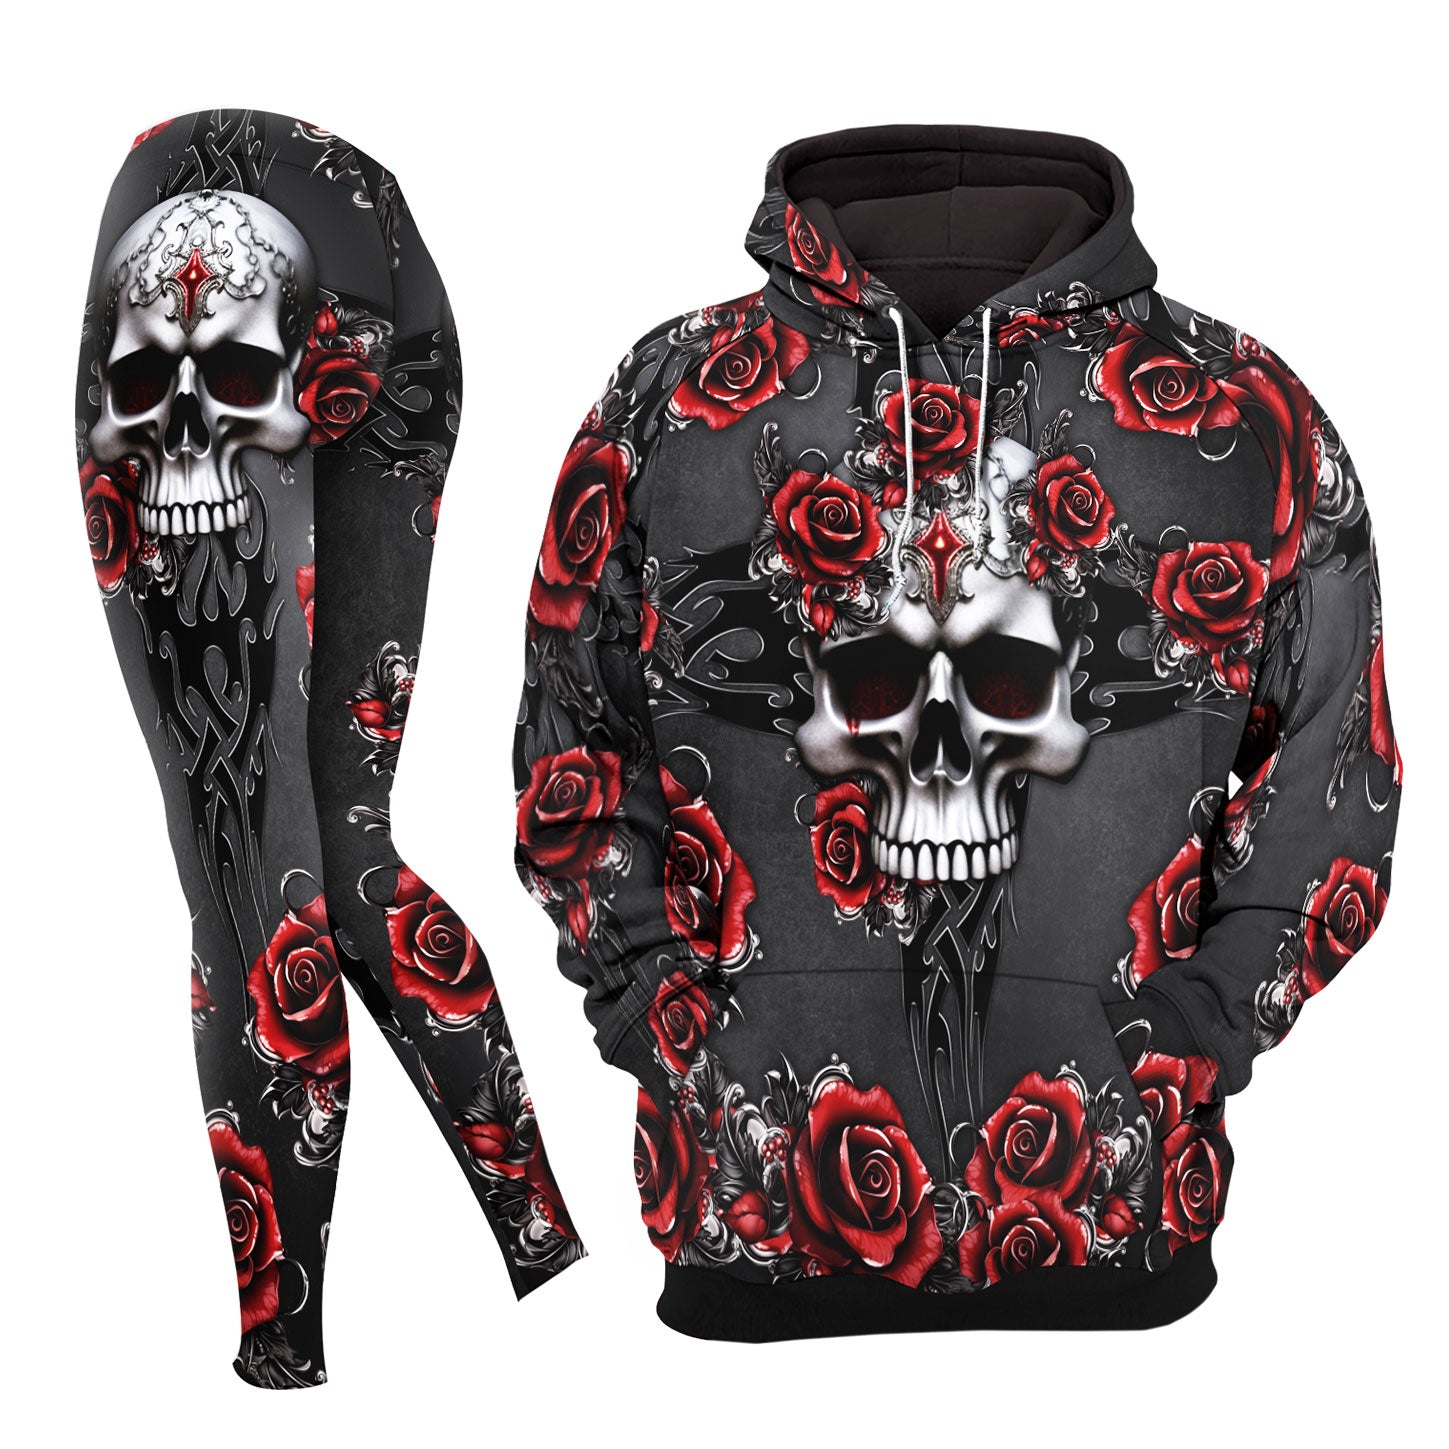 Skull Thorn Rose Gothic Combo Hoodie and Leggings - Dark and edgy matching set with skull designs for a unique and stylish look.